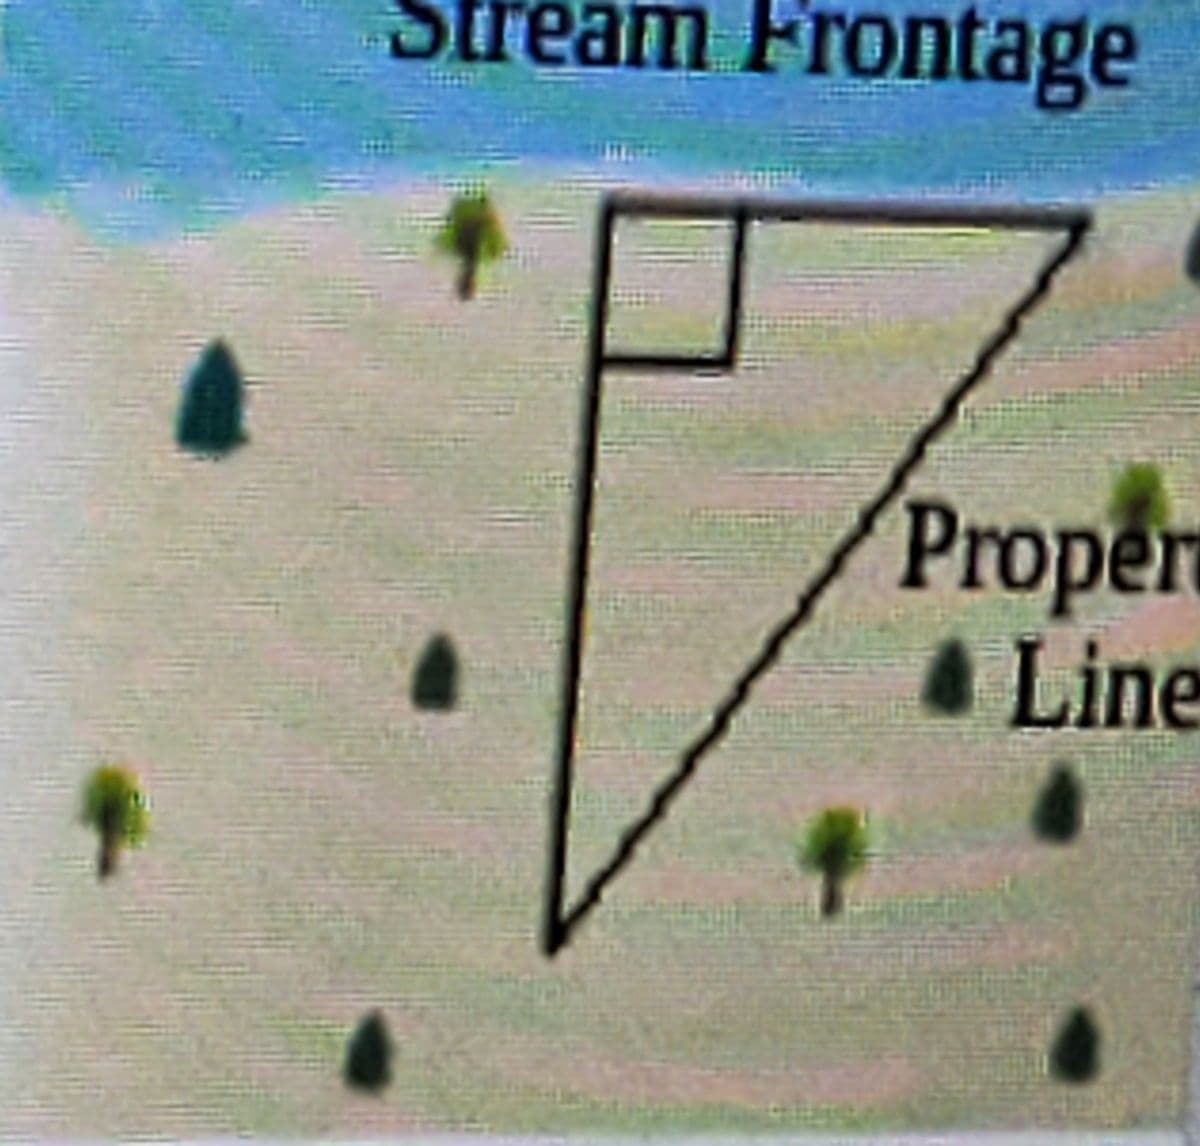 Stream Frontage
TO
Proper
Line
